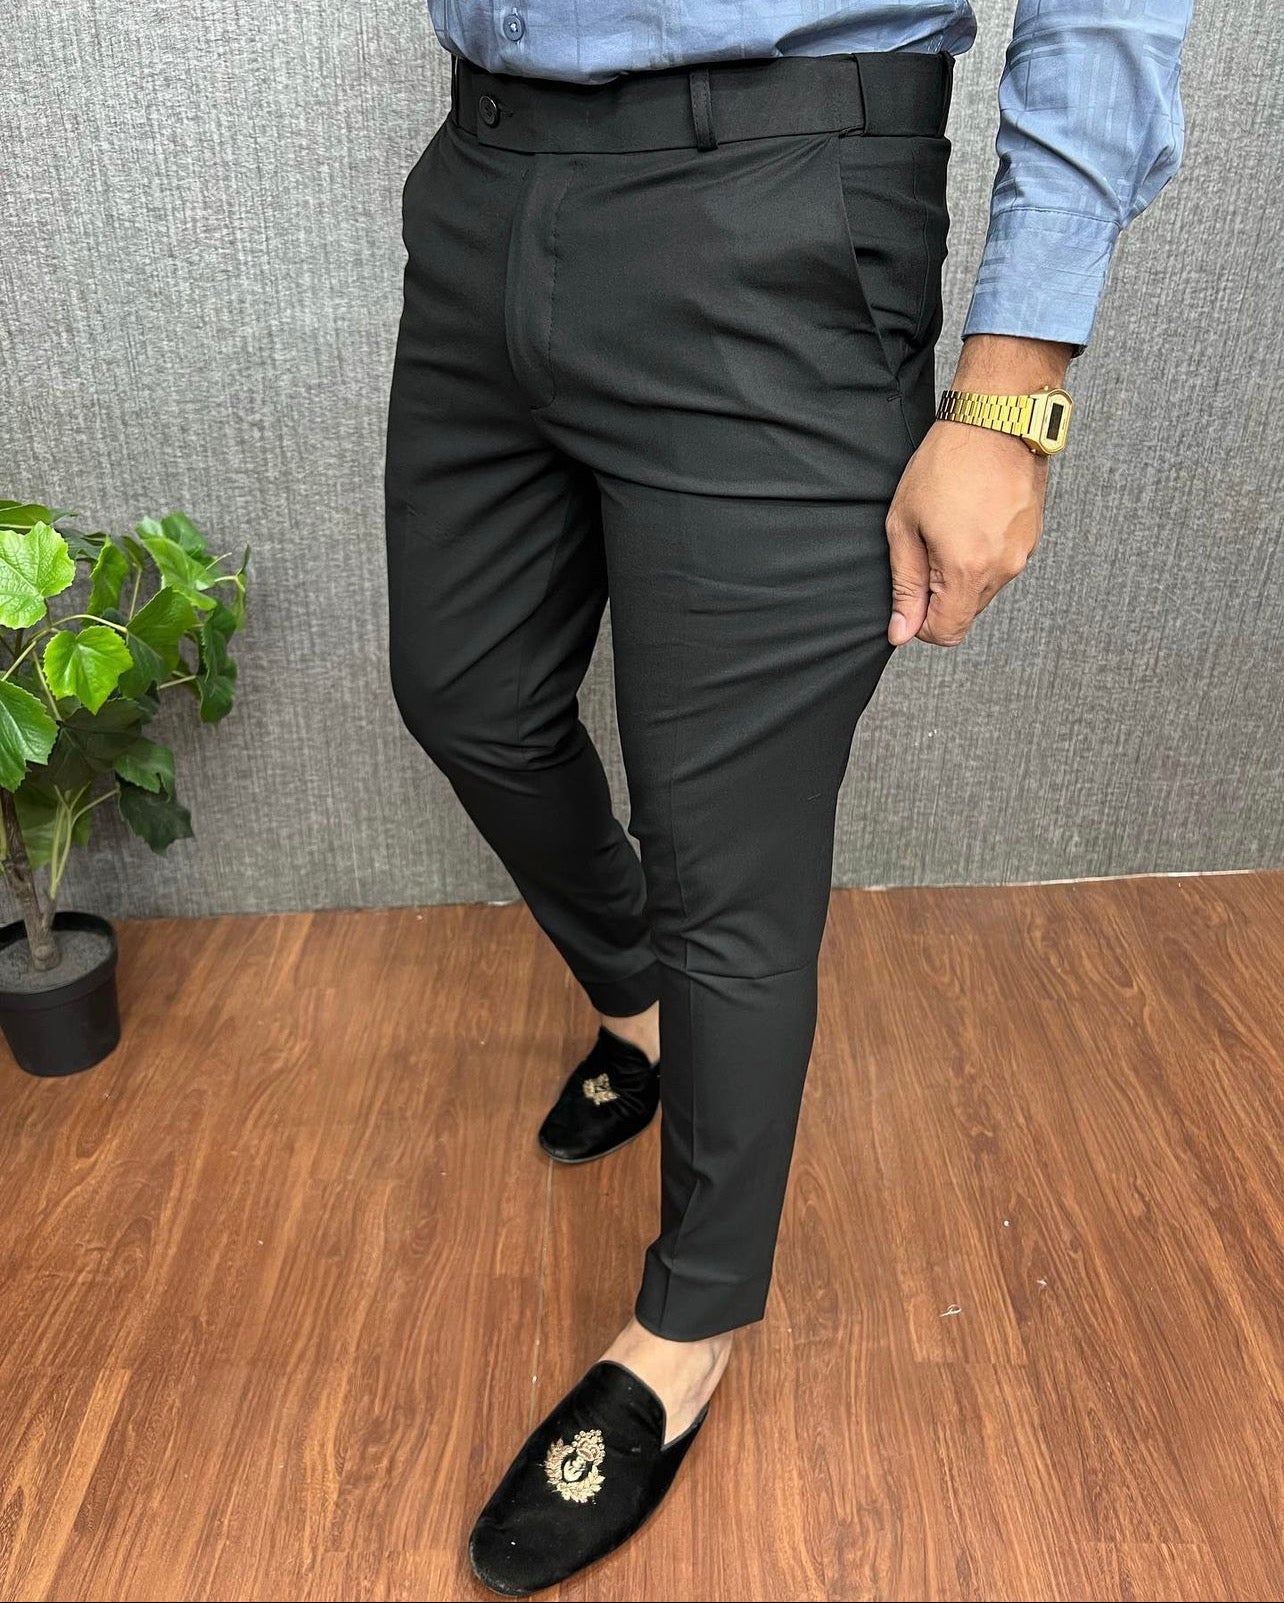 Get Poly Cotton Formal Trousers For Women - Black | Powersutra